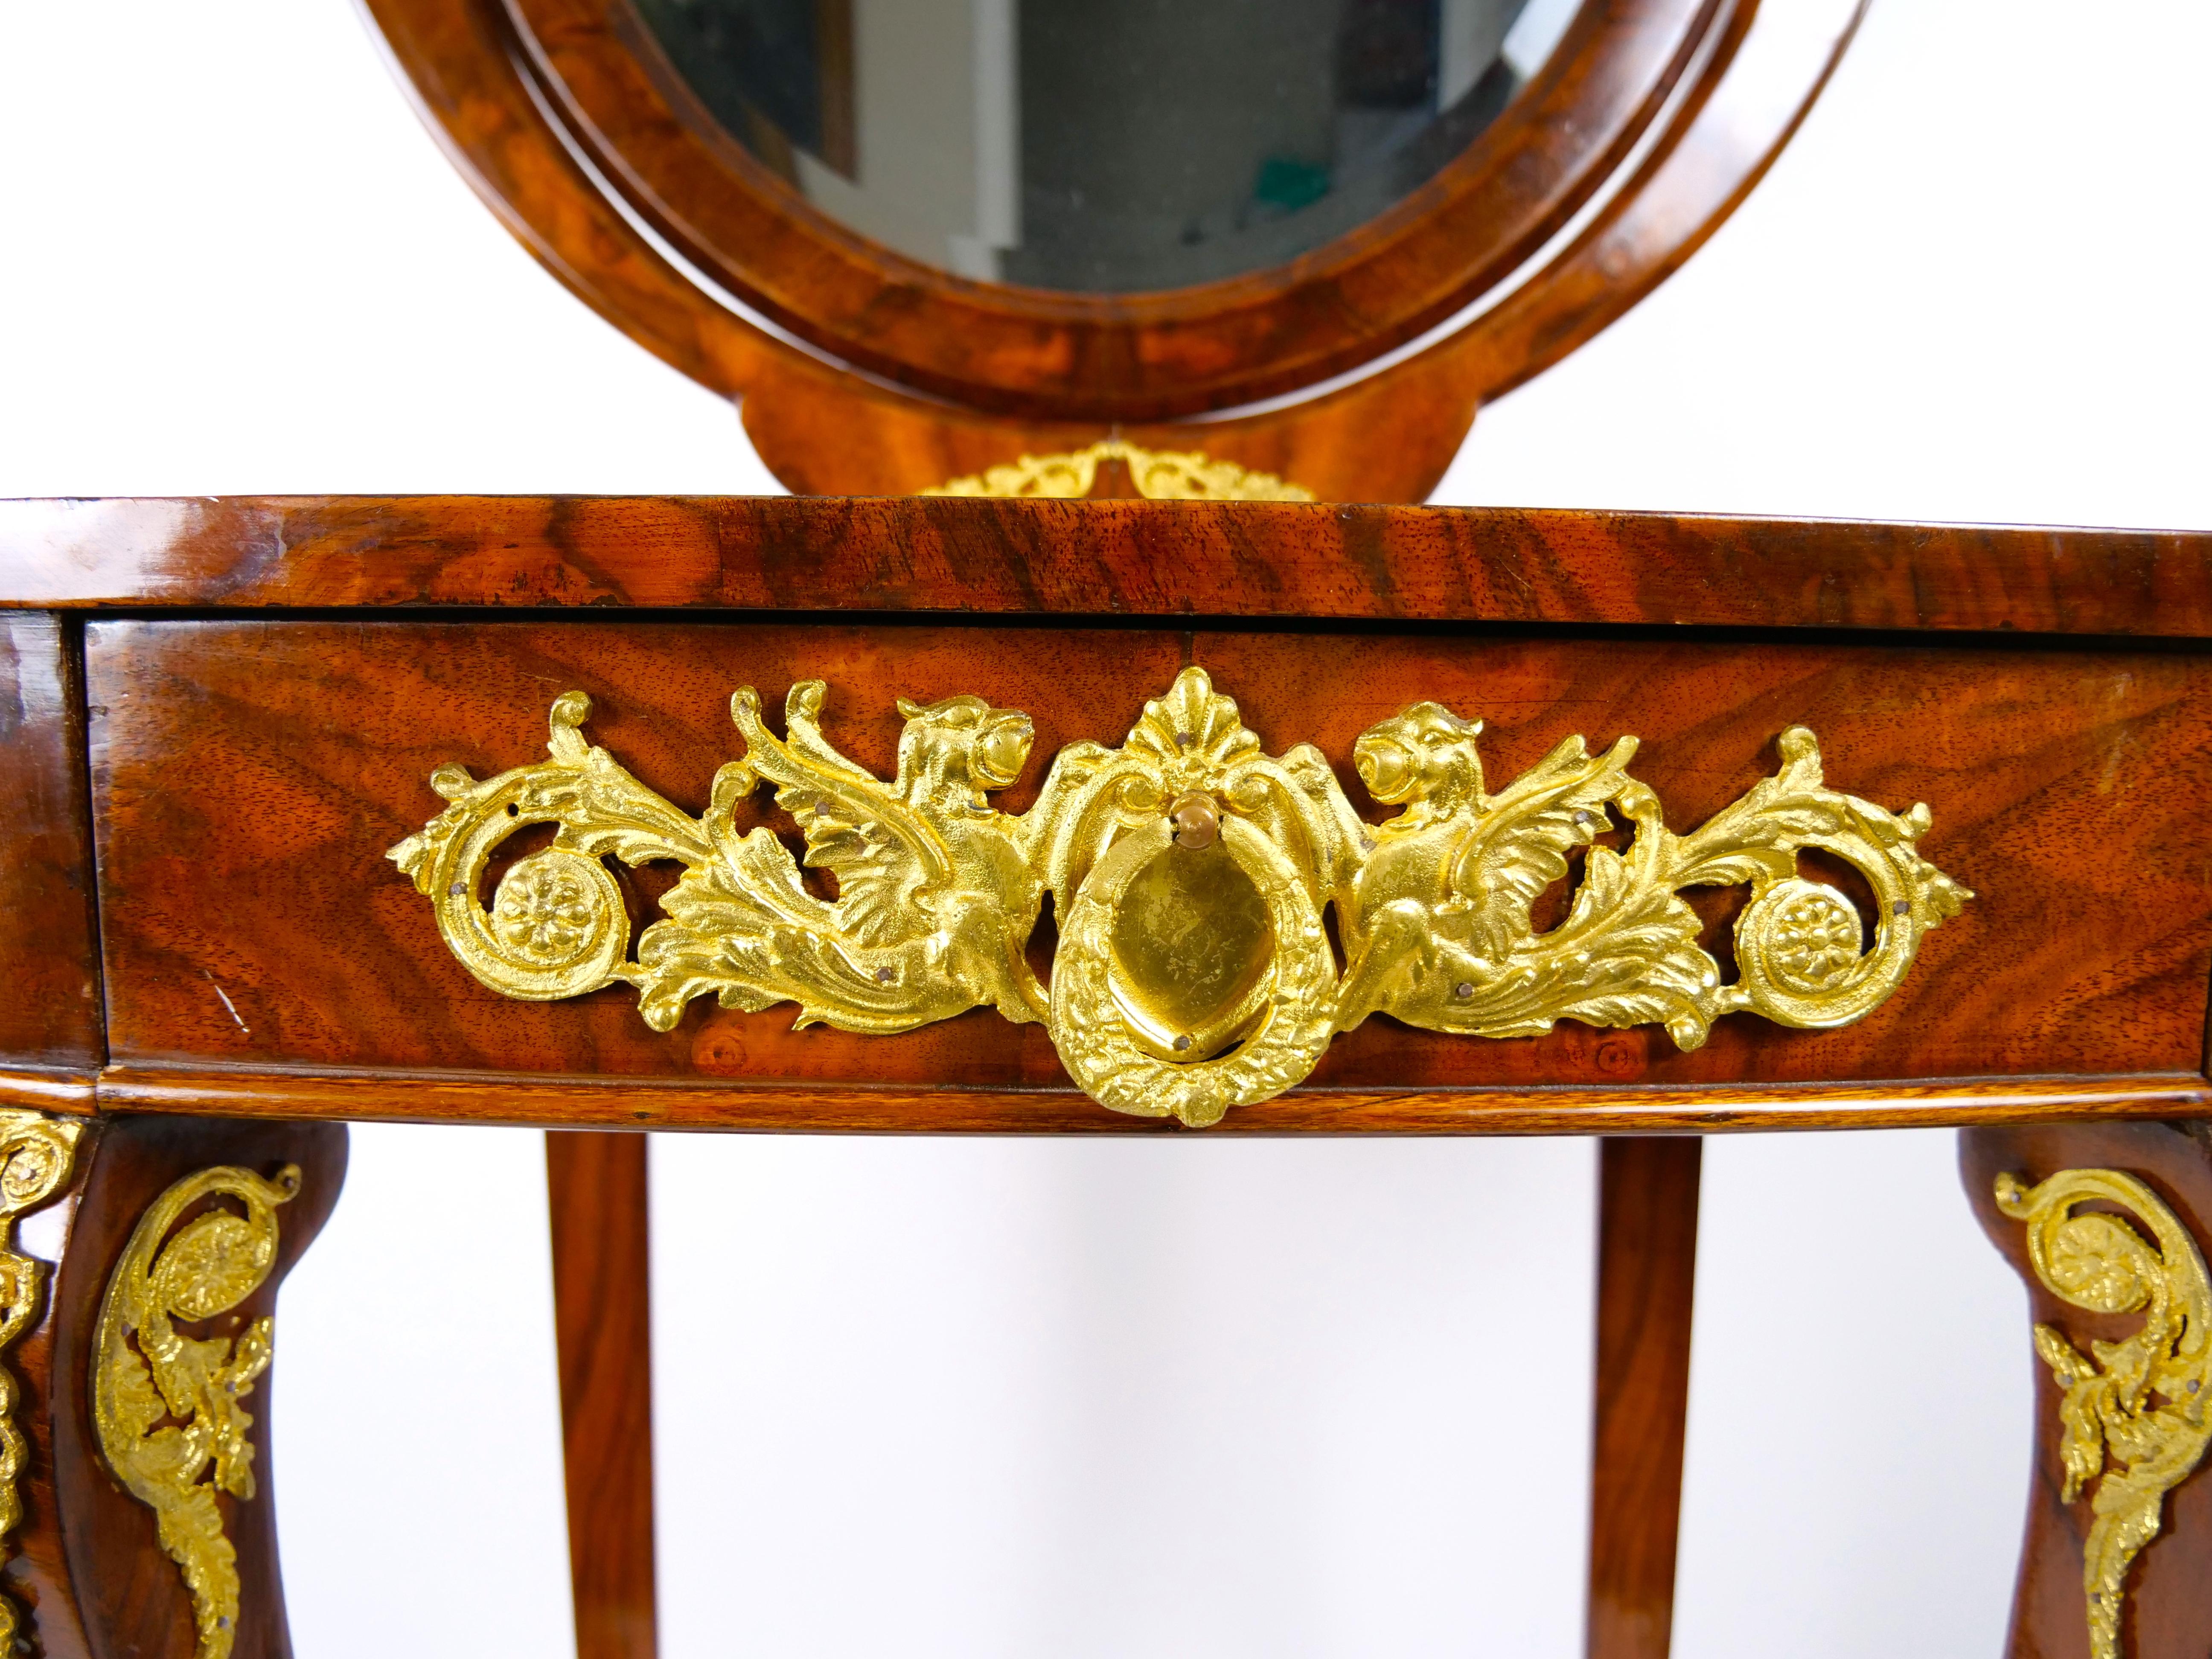 19th Century French Neoclassical Mahogany Vanity / Ormolu Mounts For Sale 6